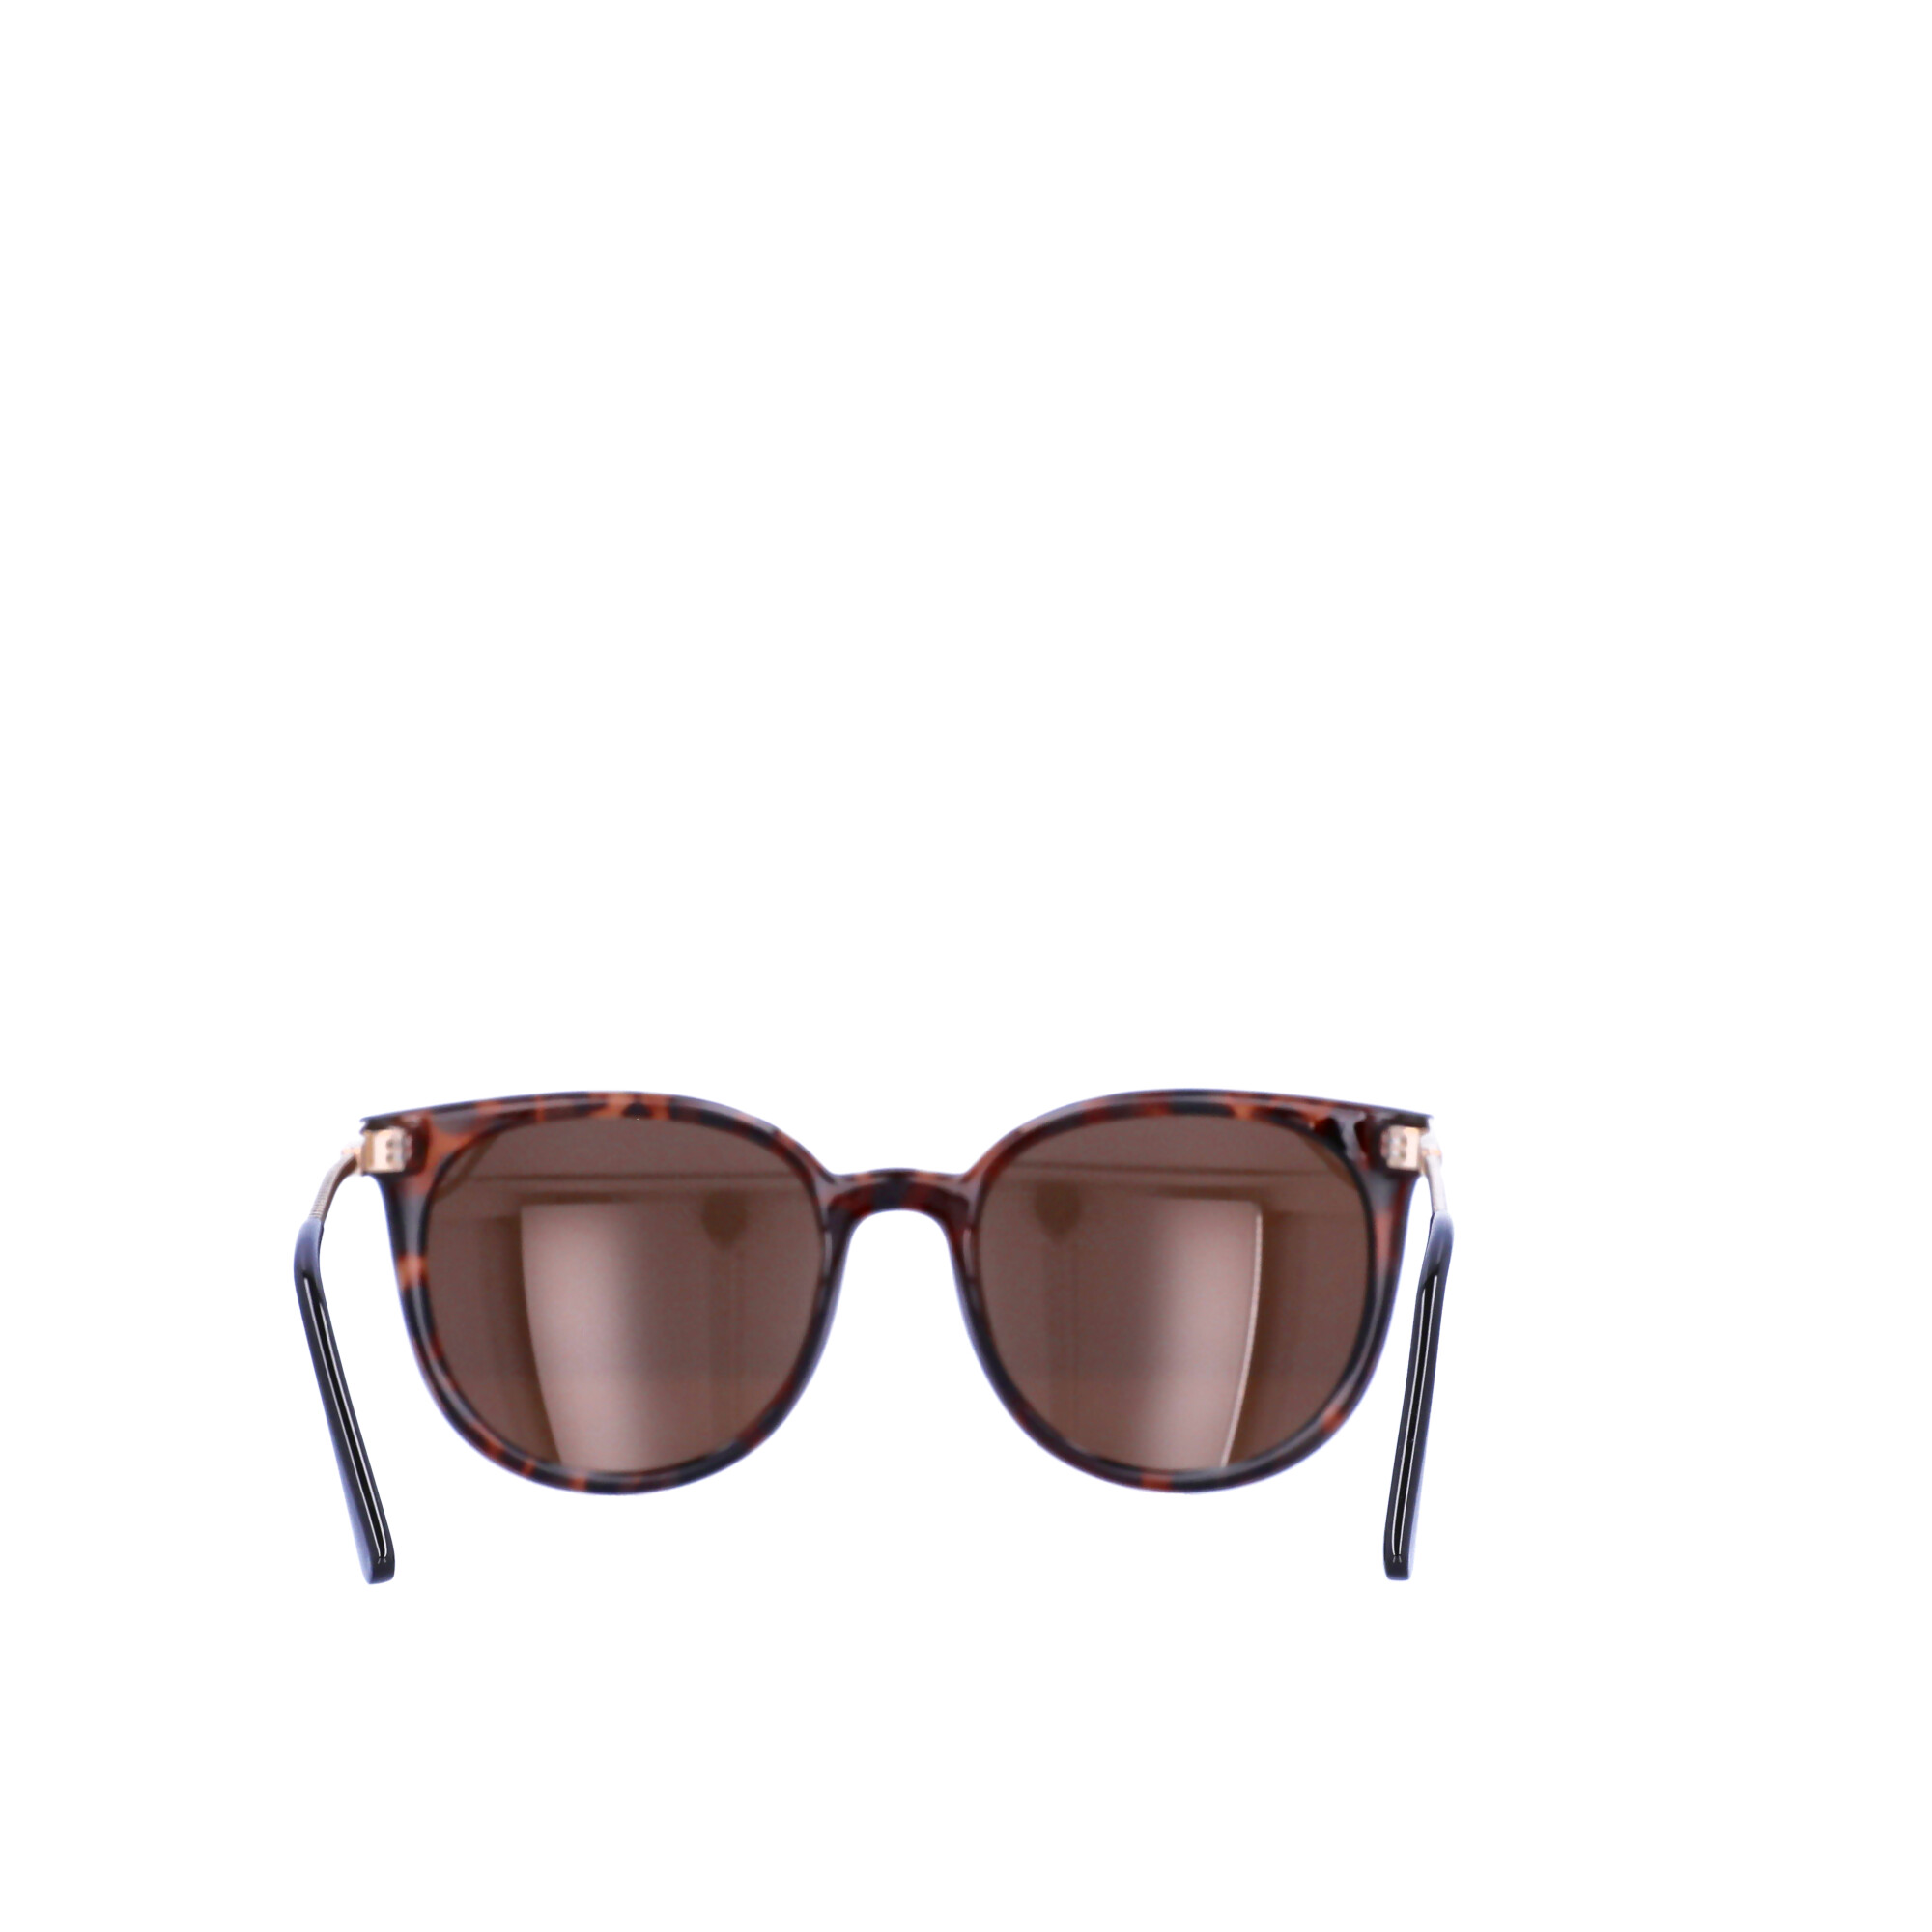 Hard Candy Womens Rx'able Sunglasses, Hs15, Dark Tortoise Patterned, 54-20-143, with Case - image 3 of 13